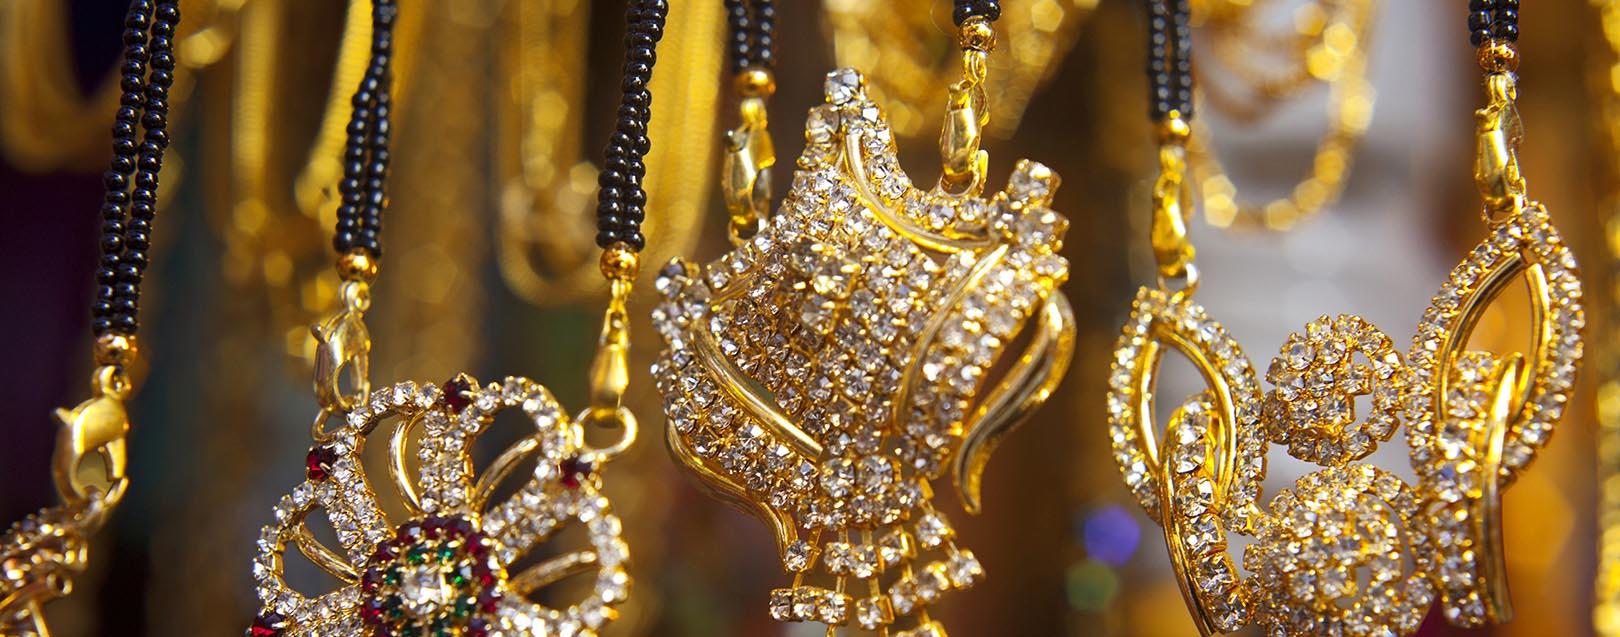 Online Jewellery market may grow in another 3 years